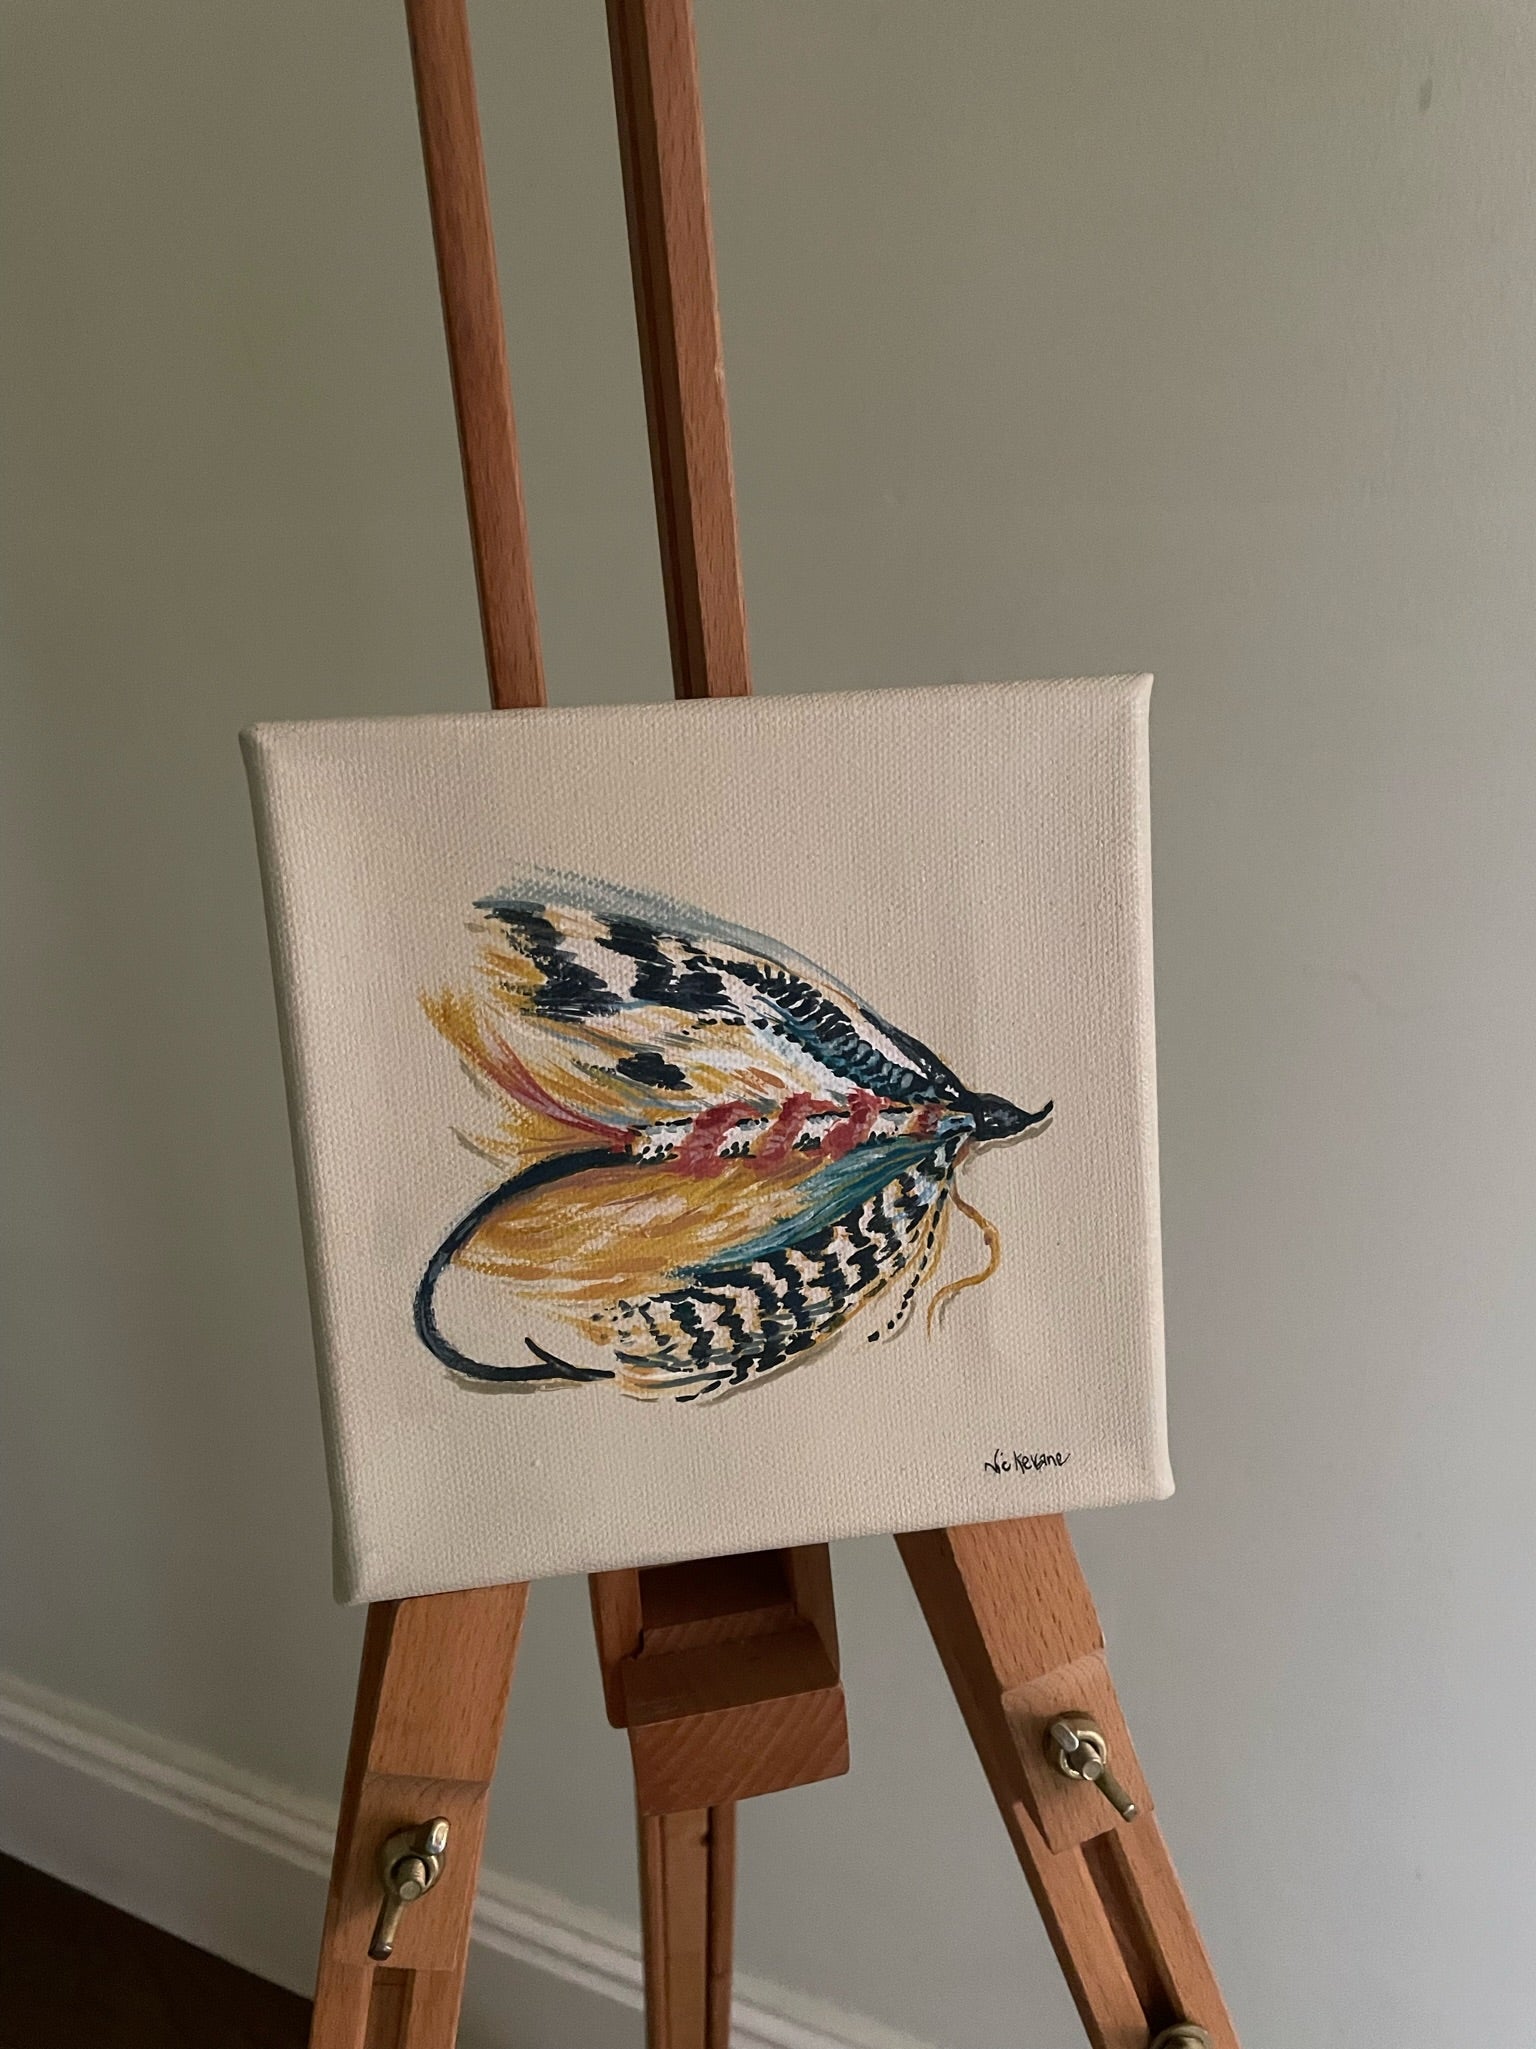 Striped Fishing Fly - 15cm x 15cm mini paintings depicting various countryside subjects.